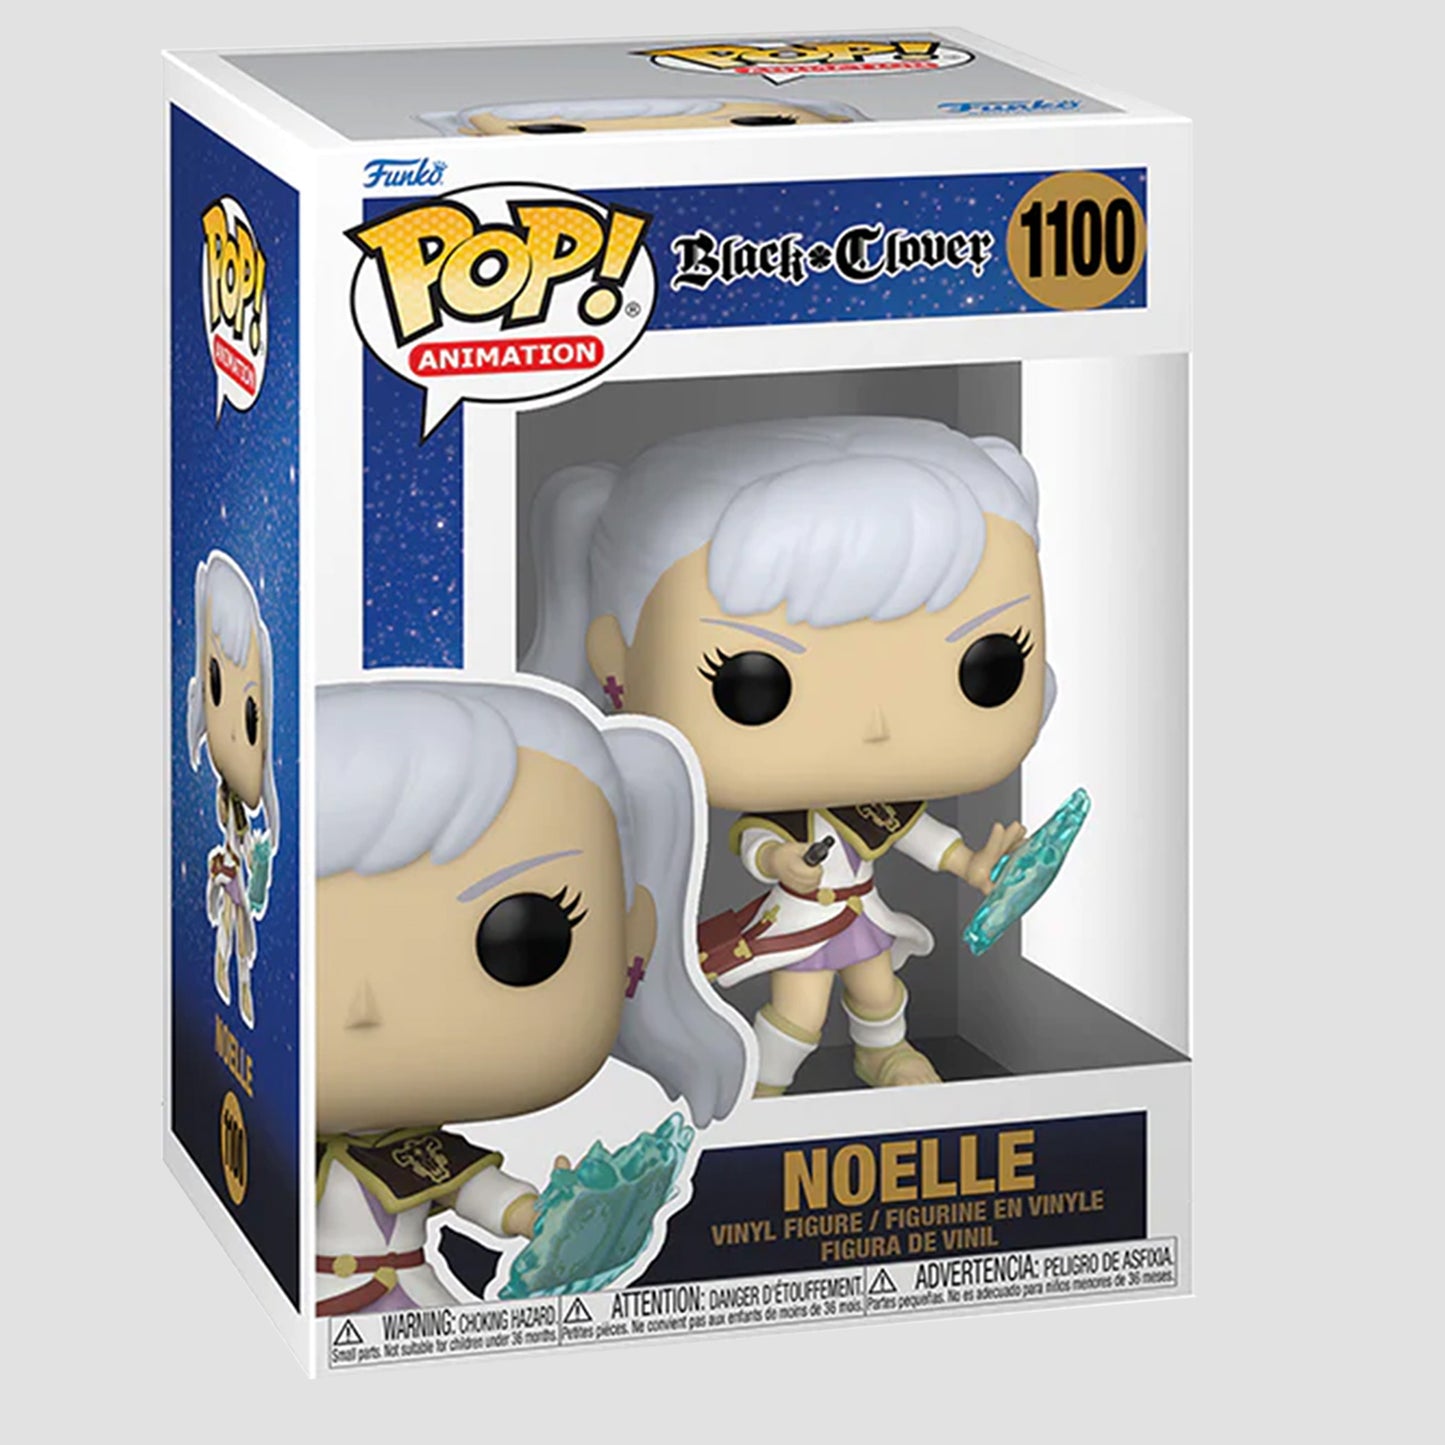 Load image into Gallery viewer, Noelle (Black Clover) Funko Pop!
